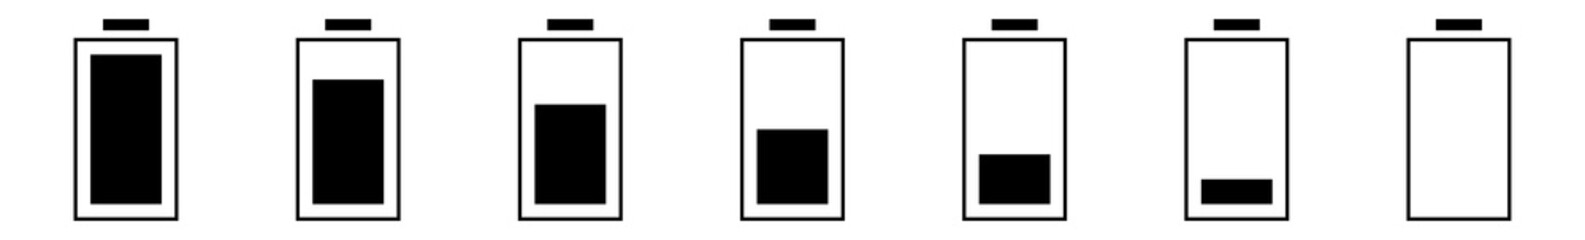 Battery Icon Black | Batteries | Charge Level Symbol | Charging Accumulator Logo | Low High Capacity Sign | Isolated